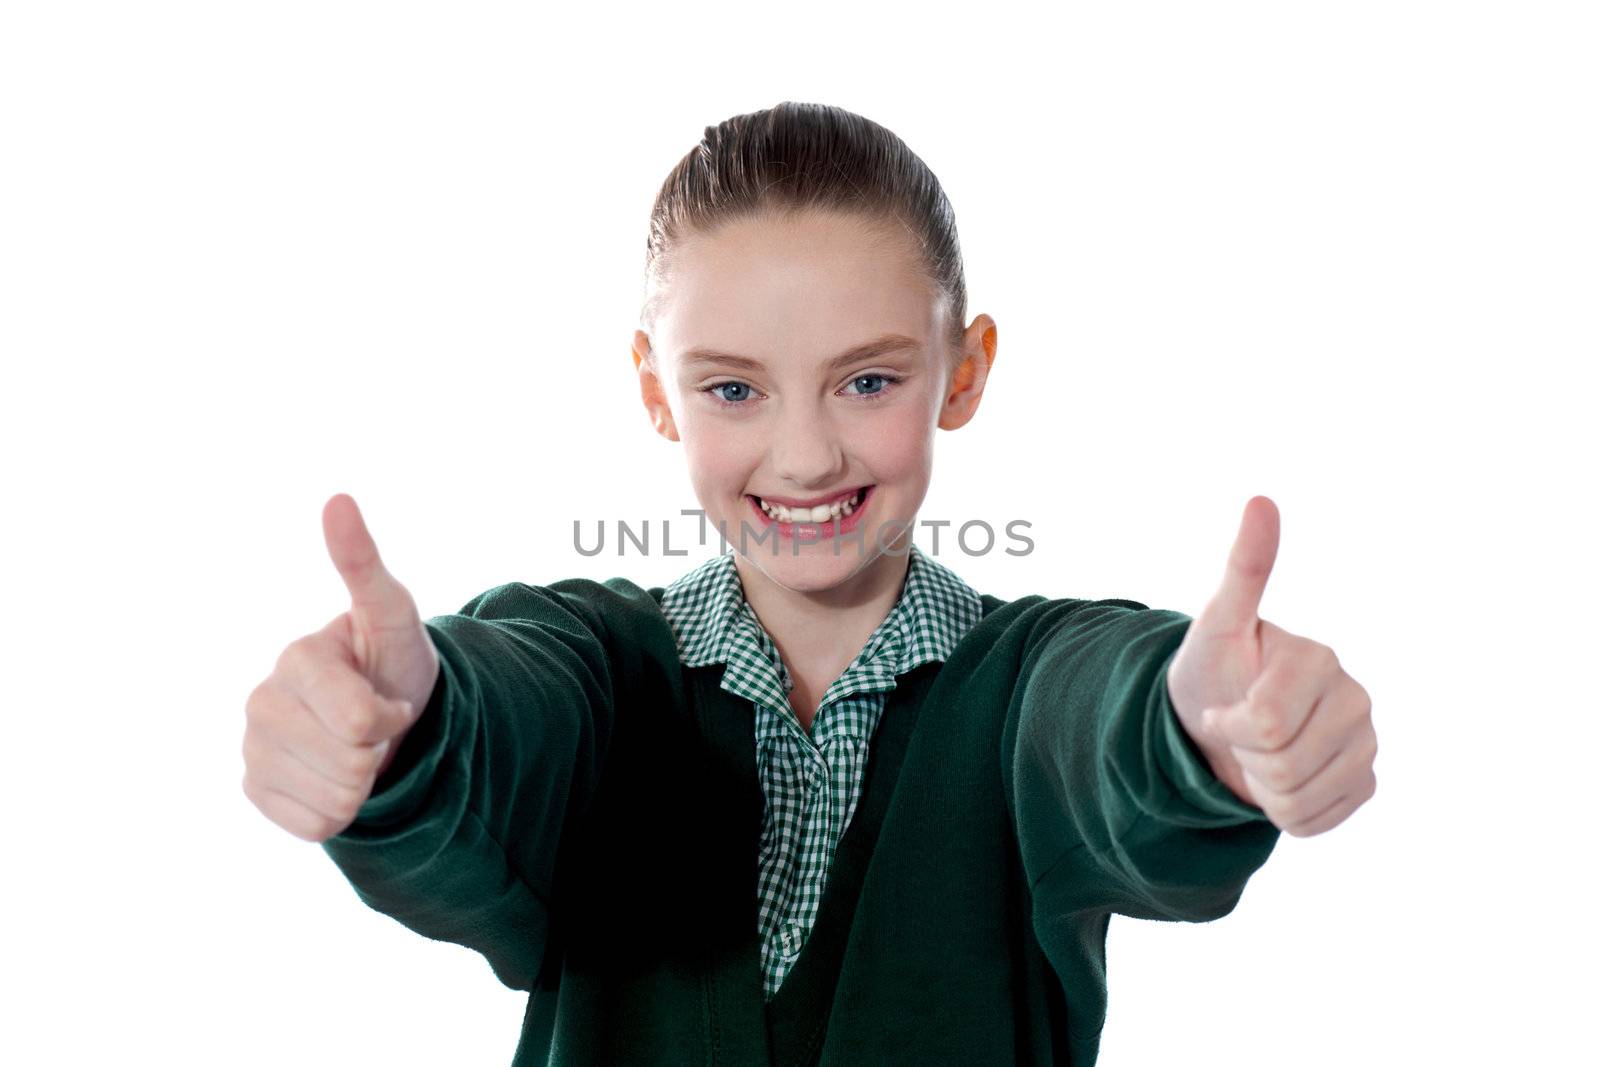 Little girl showing thumbs up to camera. Smiling and filled with joy